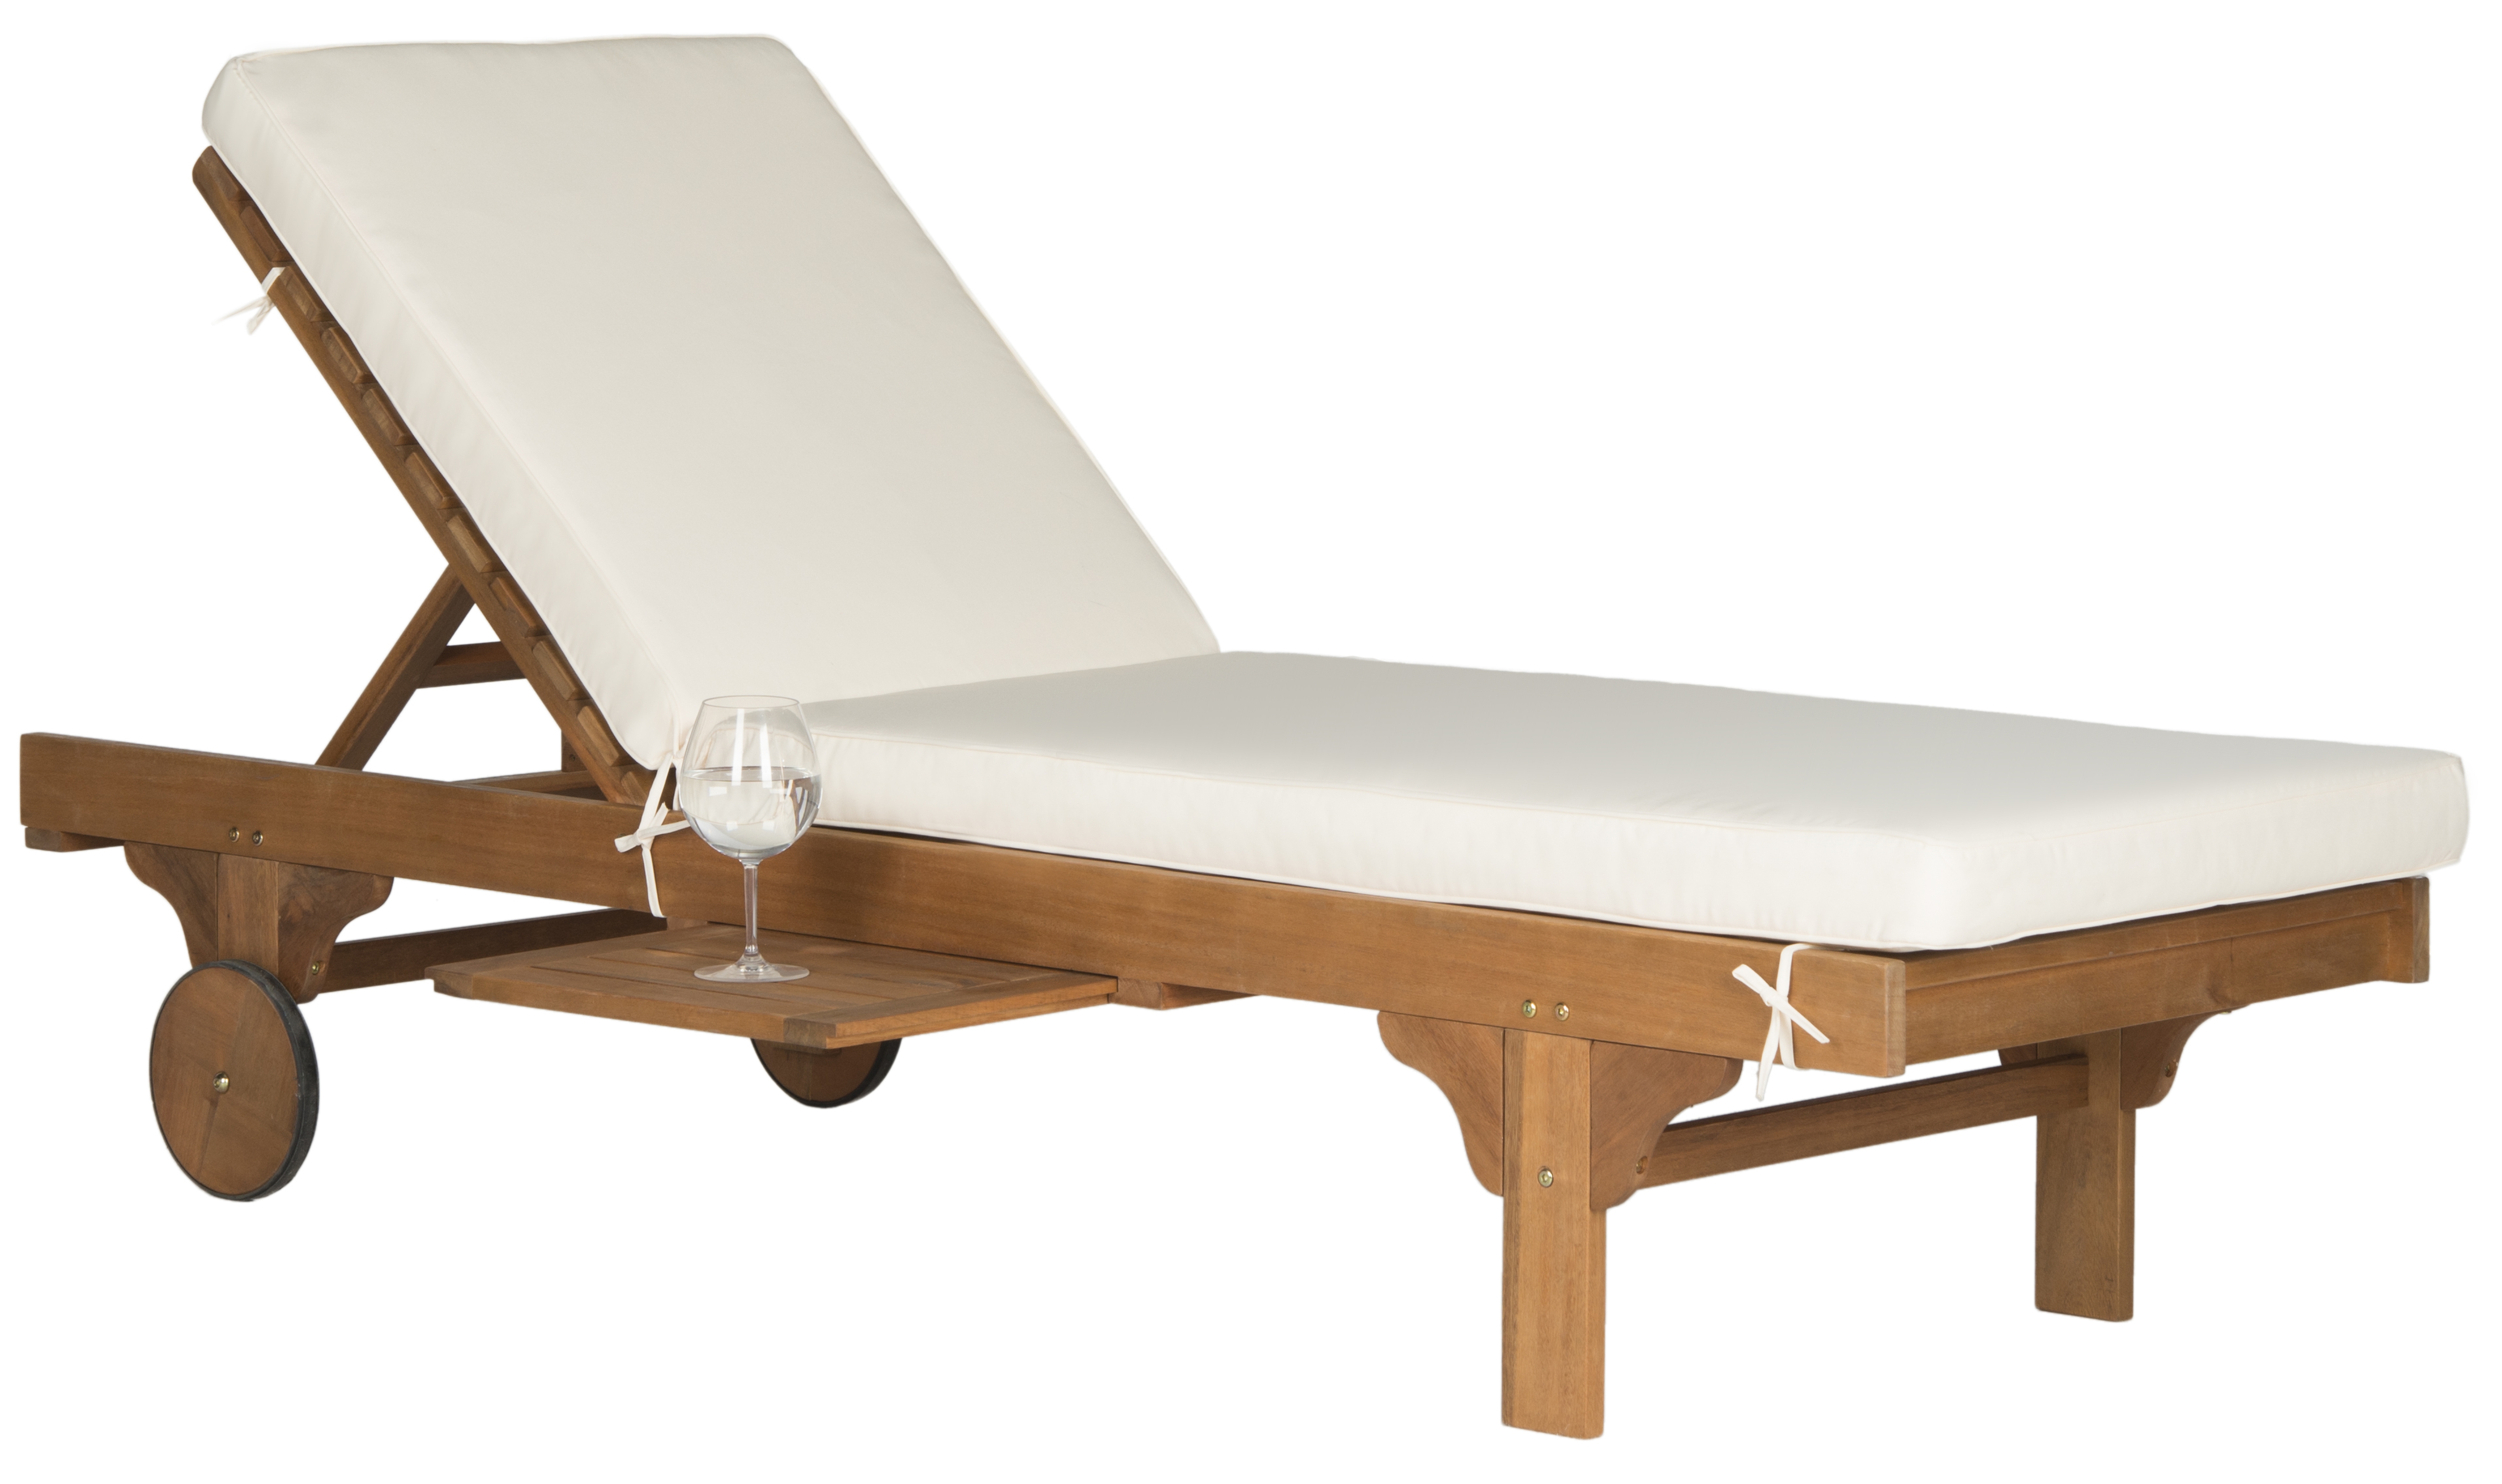 Newport Chaise Lounge Chair With Side Table - Natural/Beige - Arlo Home - Arlo Home